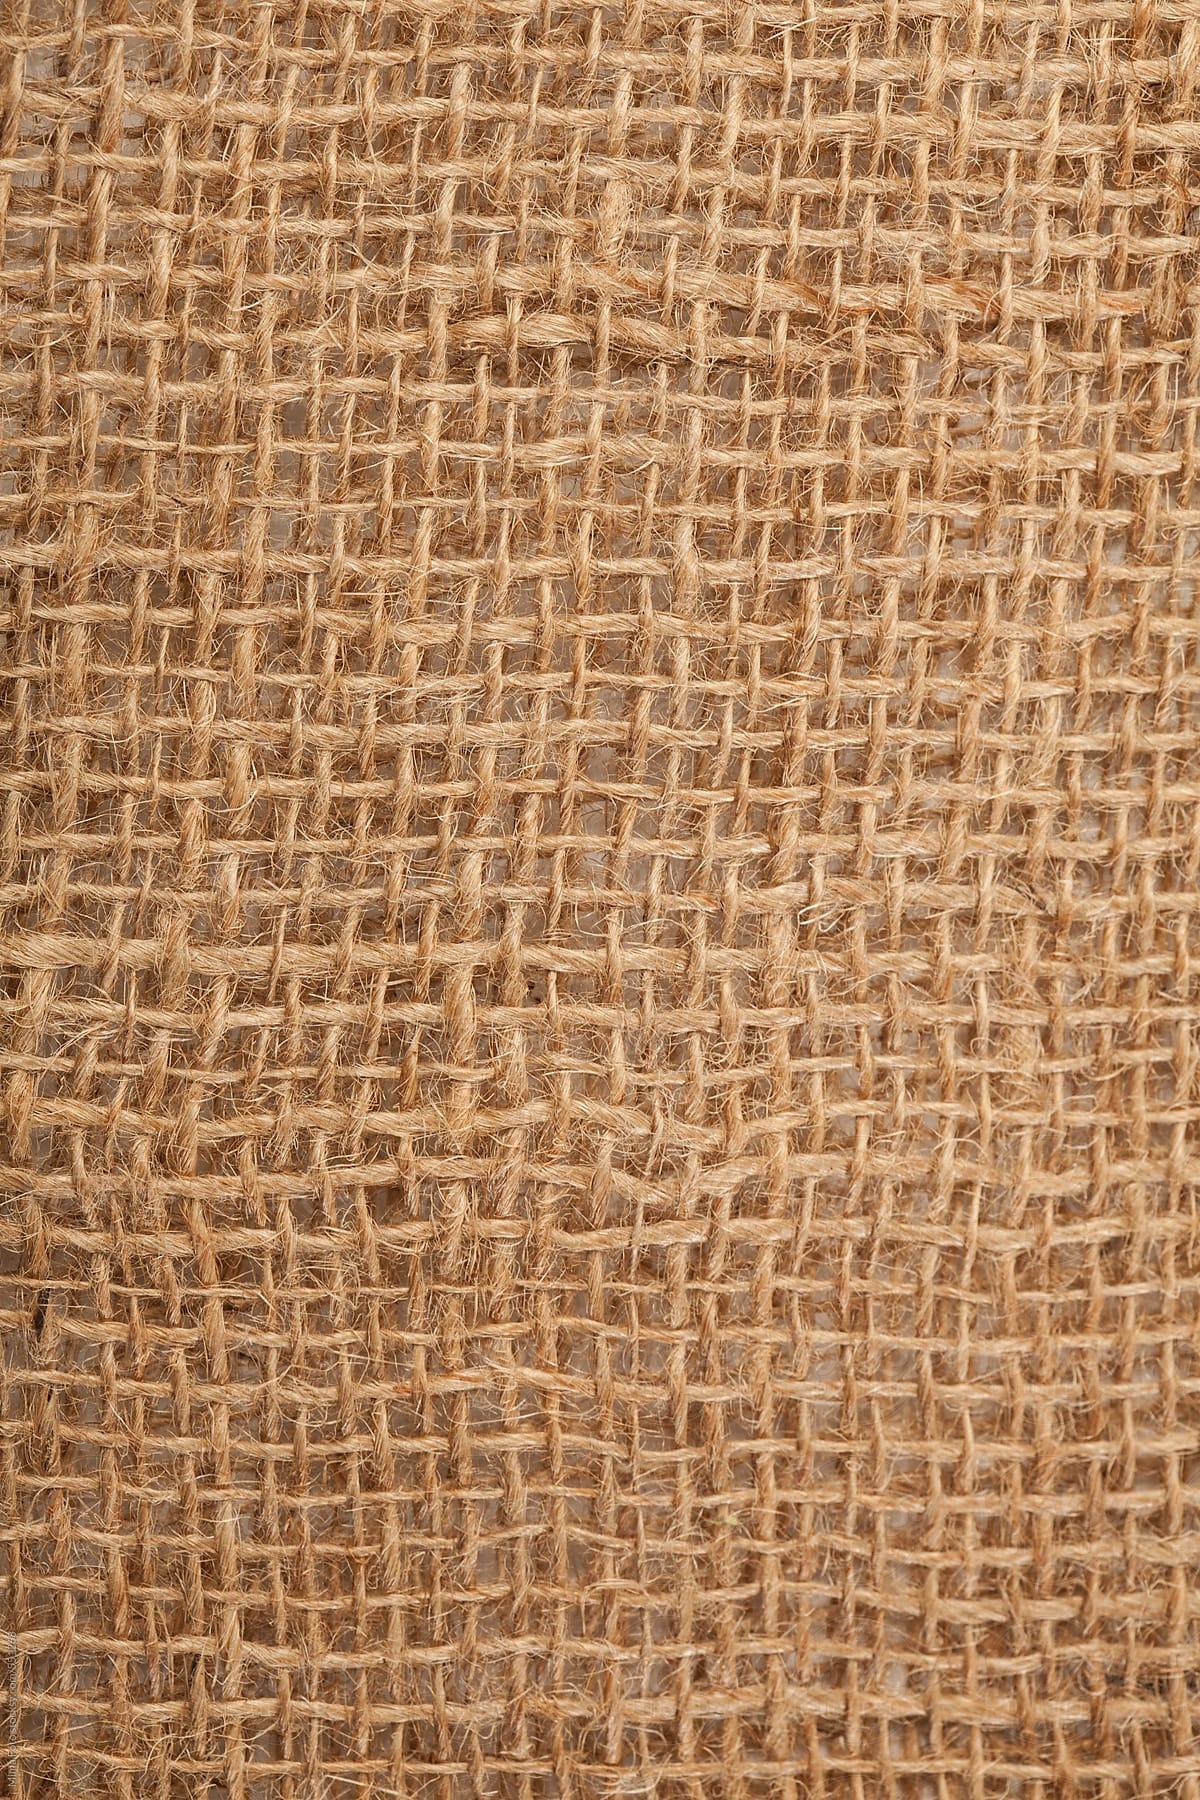 Large Area Of Jute Structure, Vertical